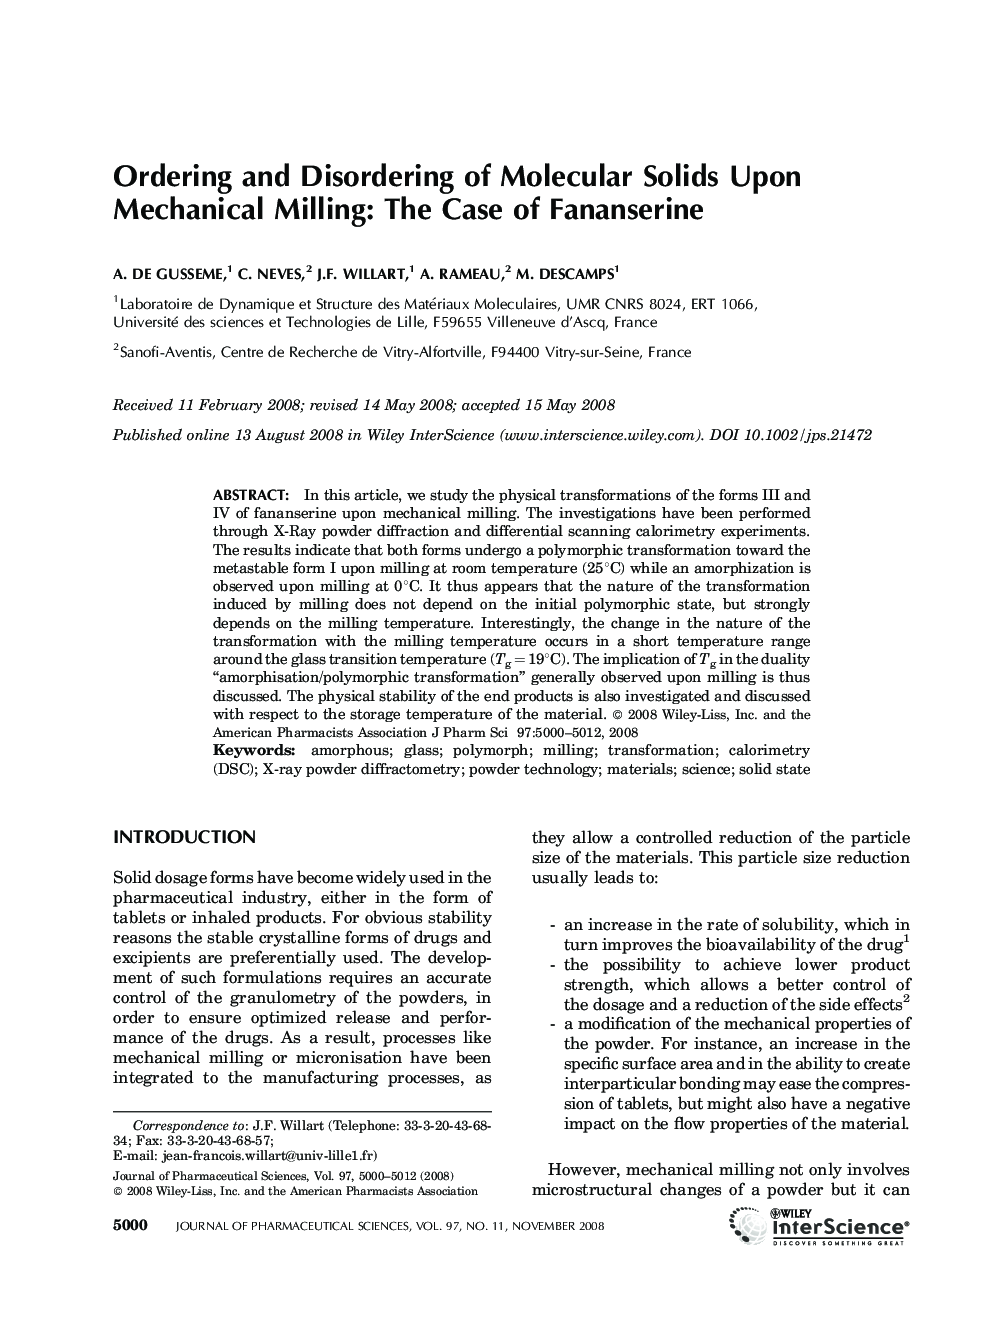 Ordering and disordering of molecular solids upon mechanical milling: The case of fananserine